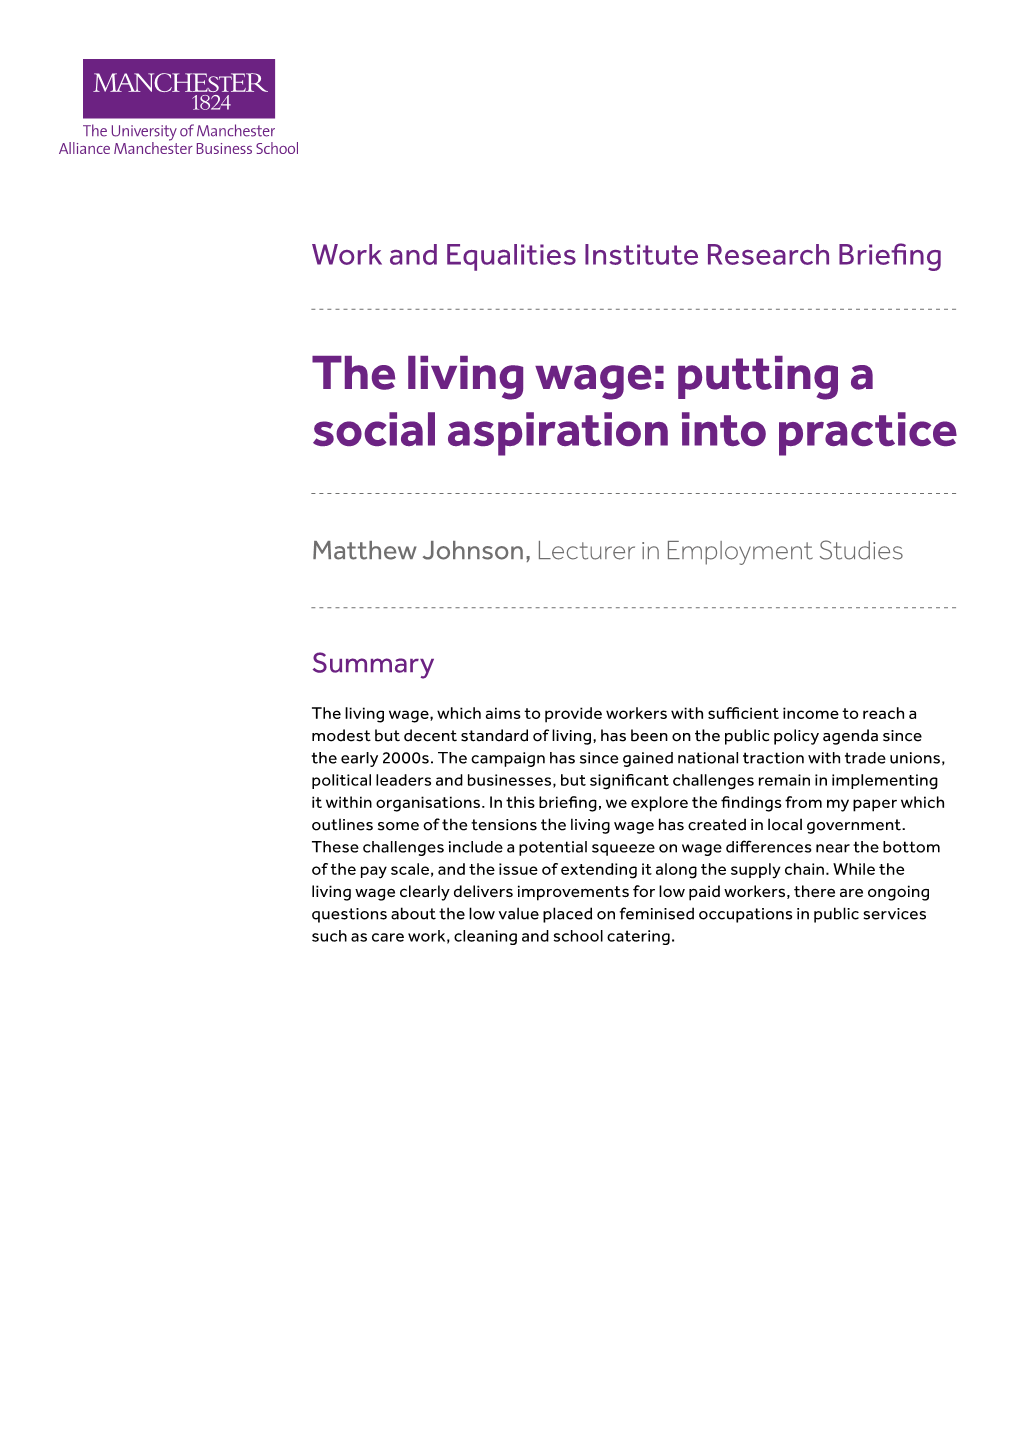 The Living Wage: Putting a Social Aspiration Into Practice